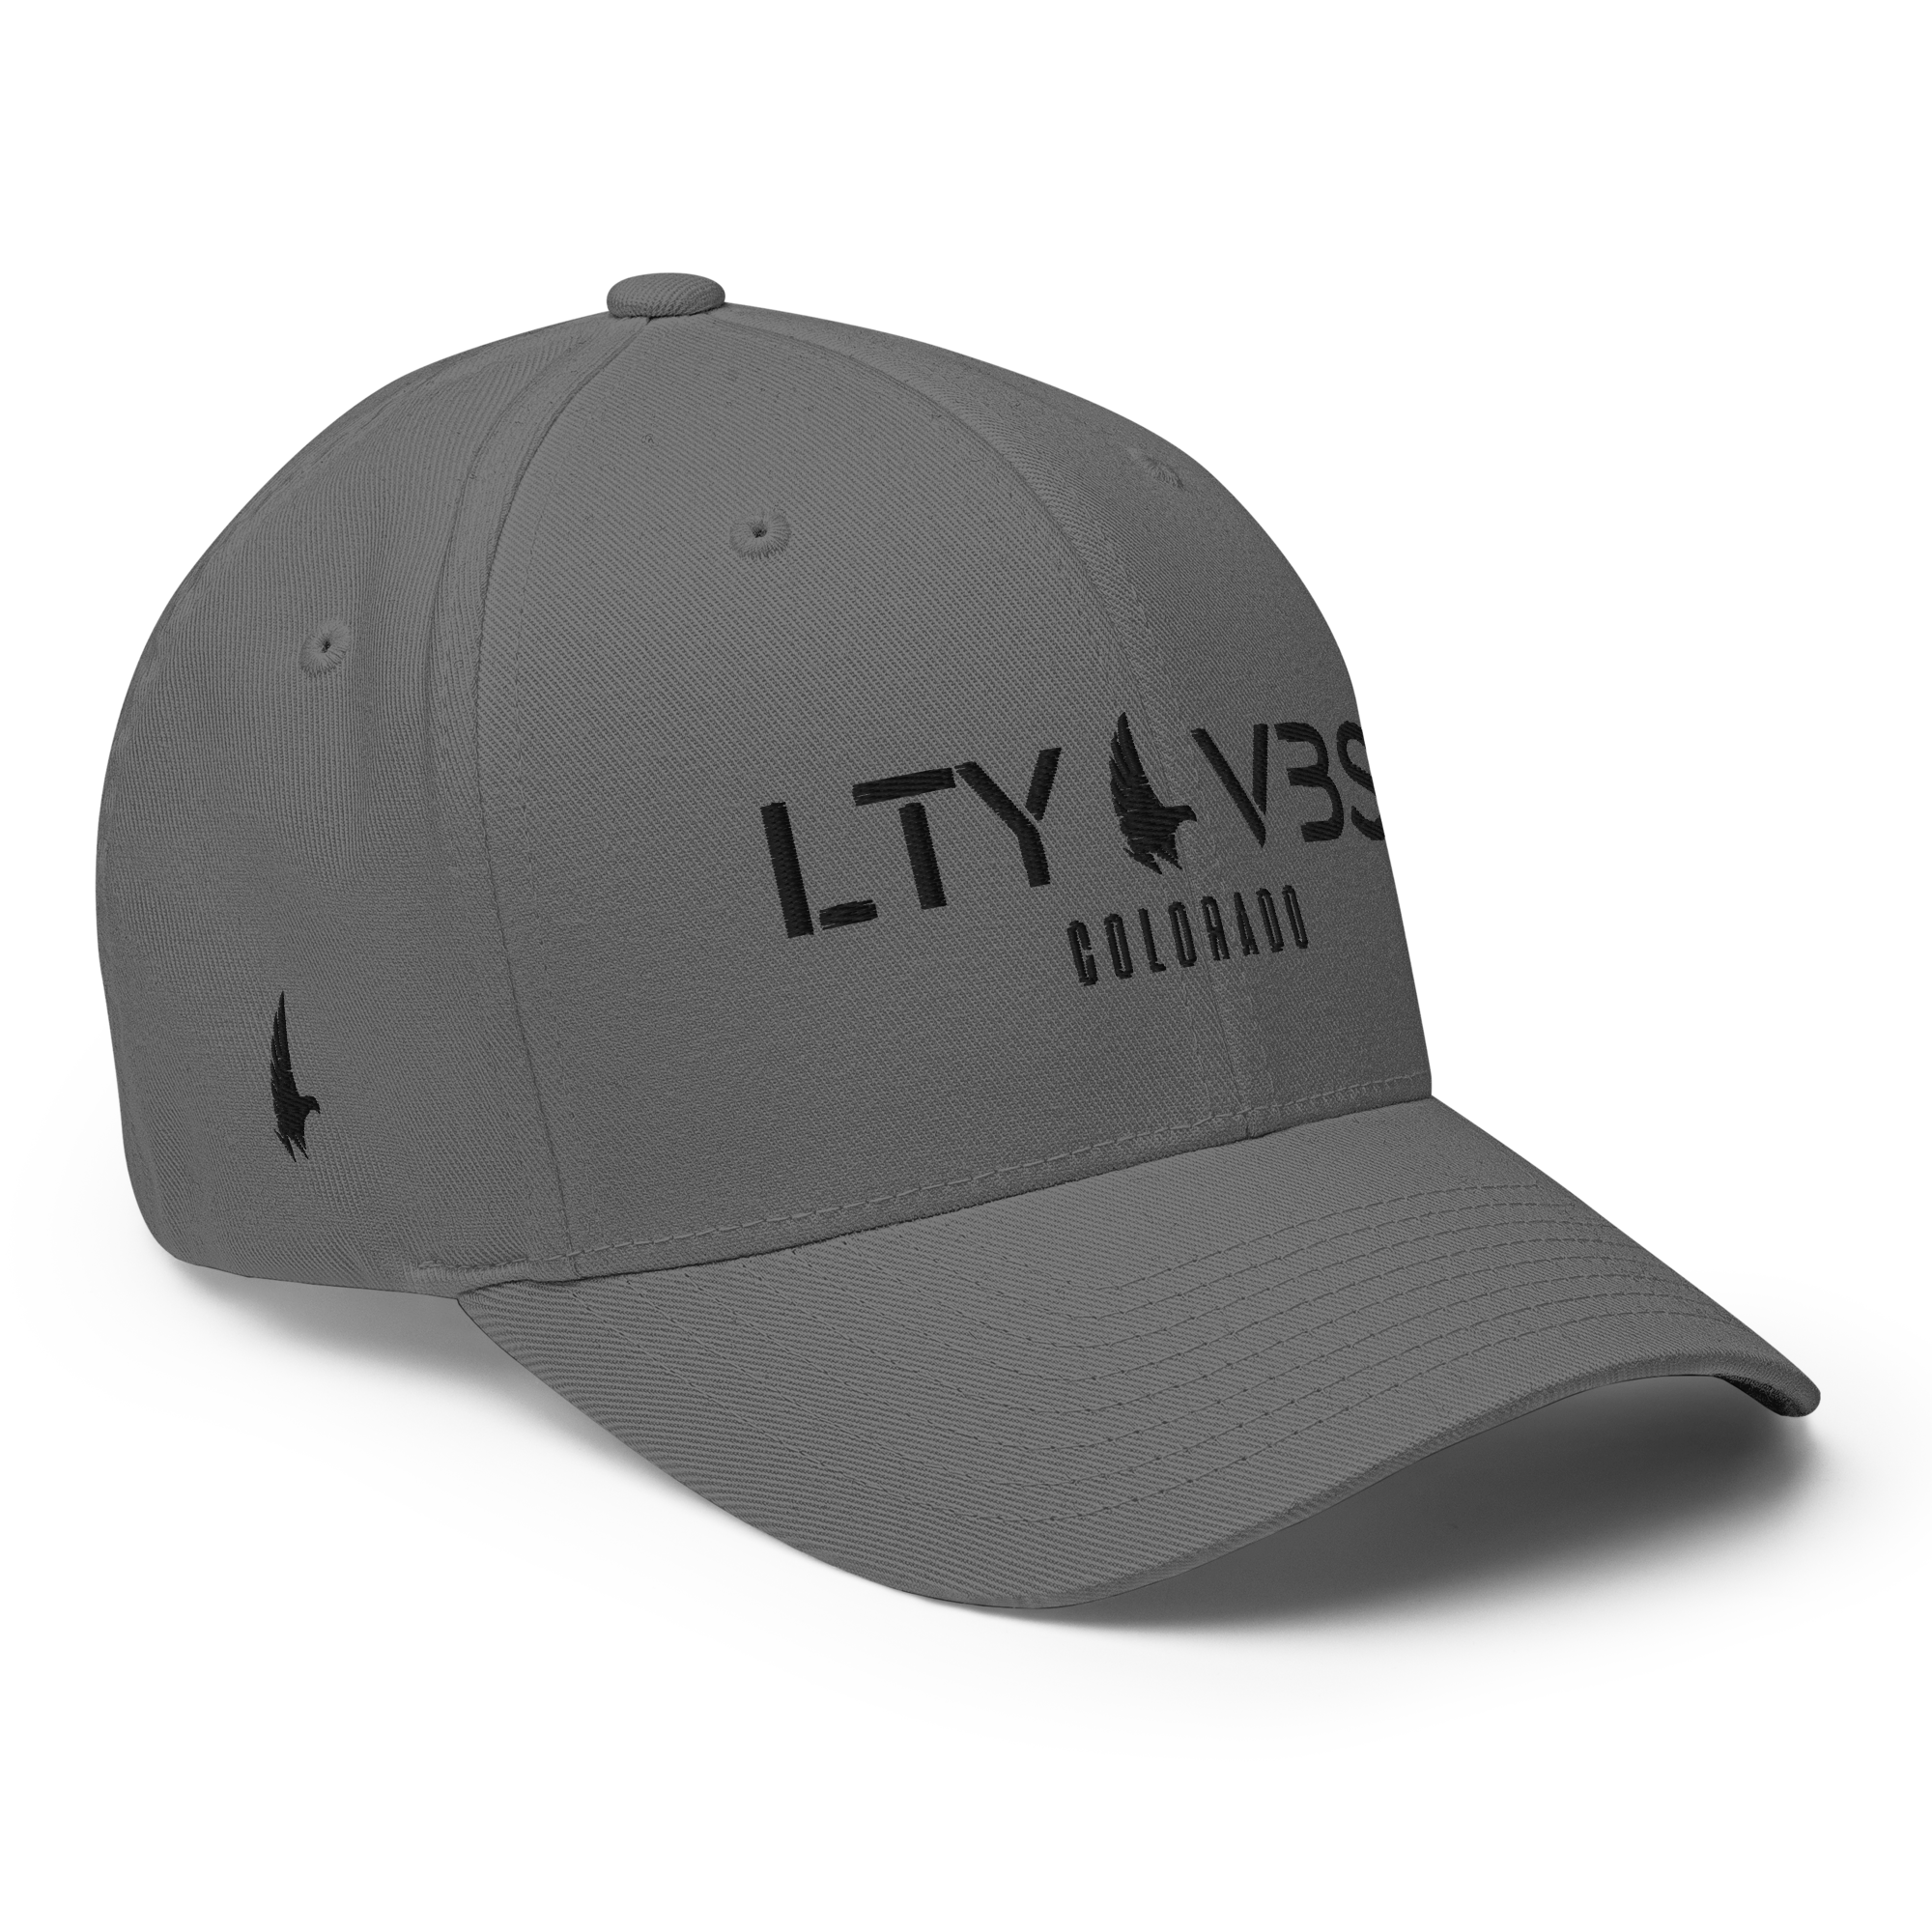 Loyalty Era Colorado Fitted Hat Gray / Black Fitted - Loyalty Vibes